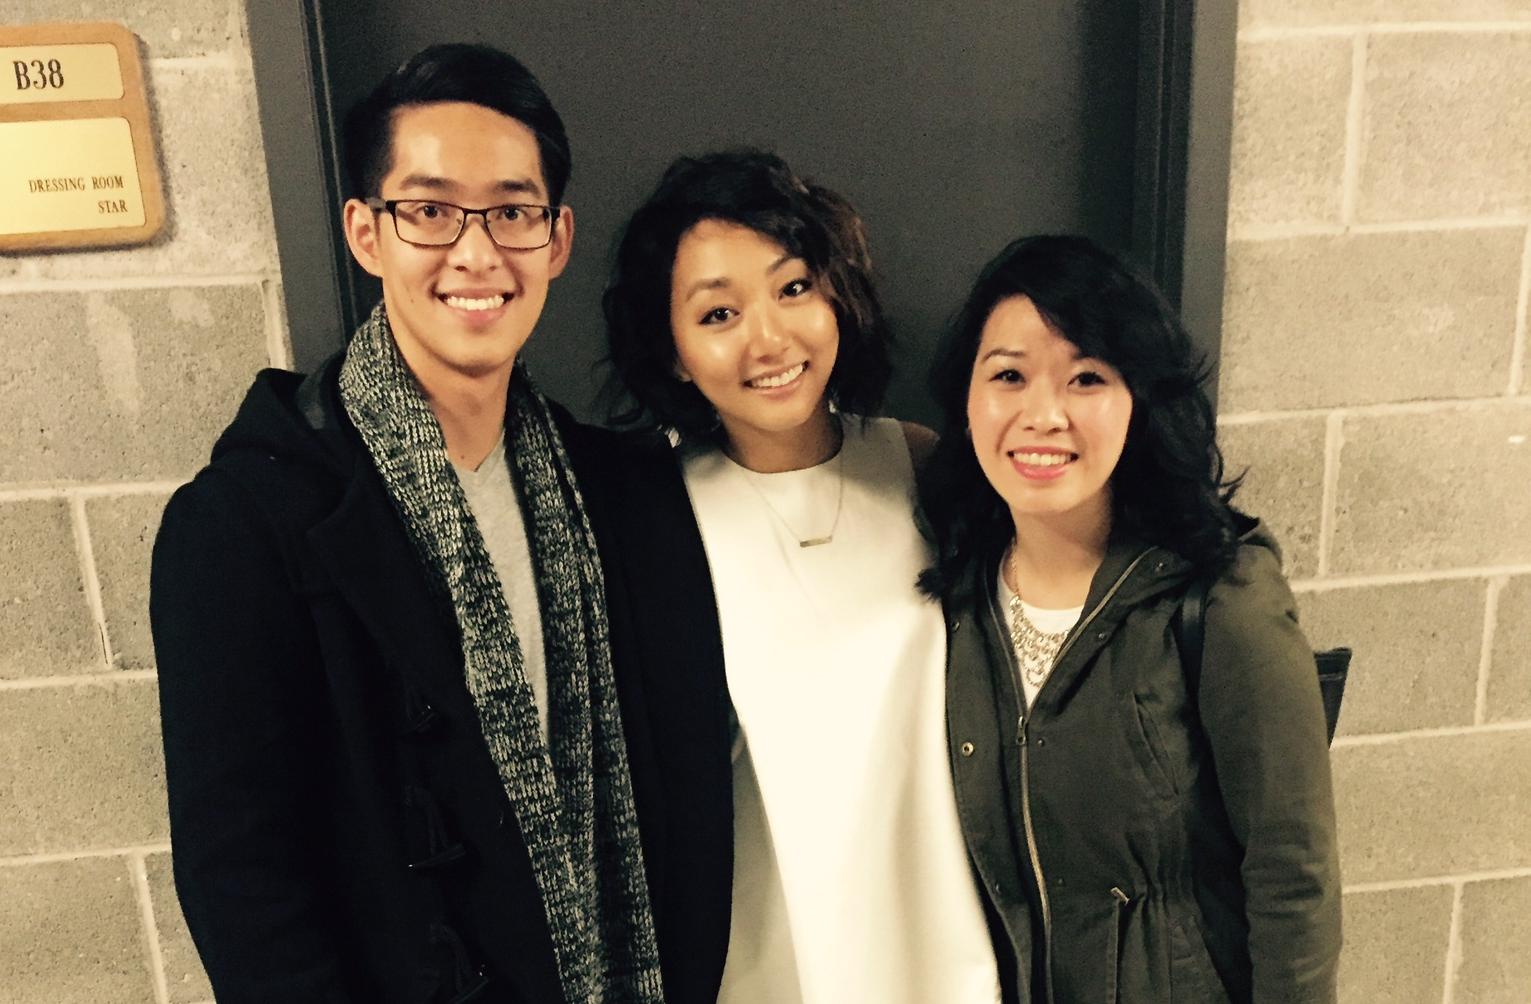 Myself, Clara C, and good friend Jaime Lau after opening for her in Binghamton's 2015 Asian Night